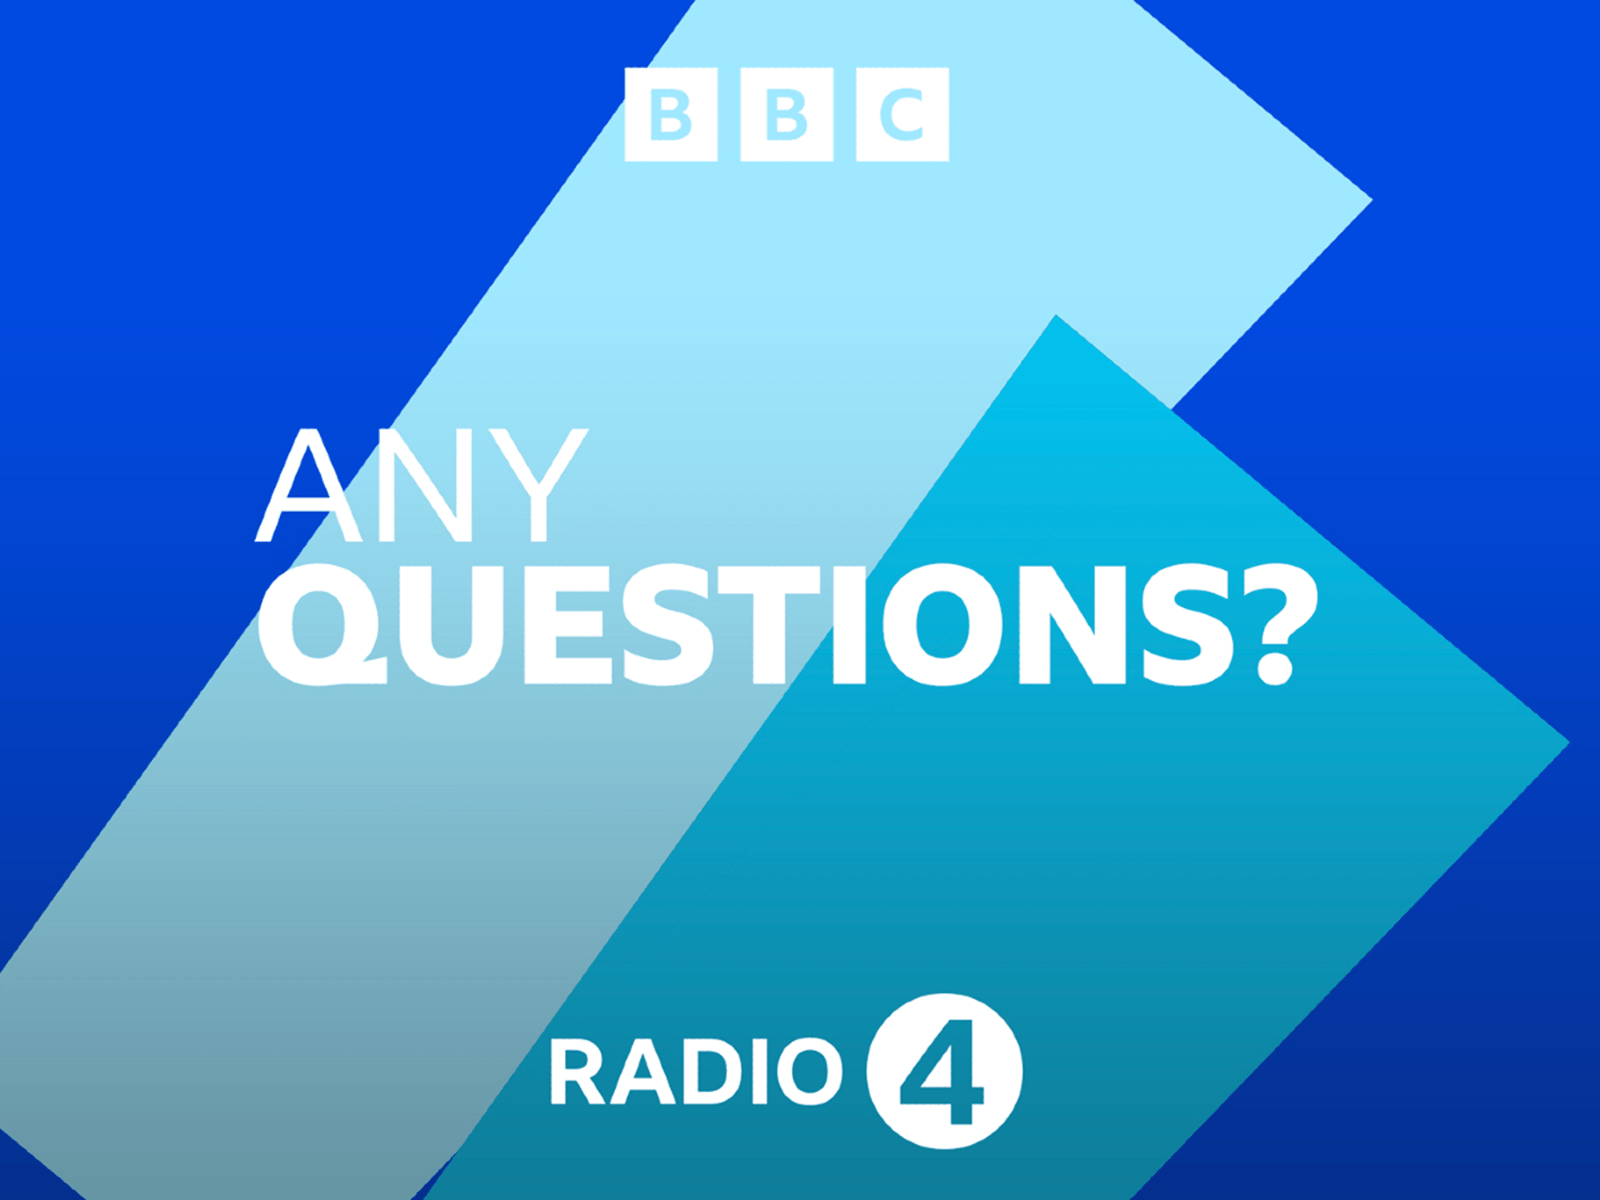 Join us live as we host BBC Radio 4's flagship topical programme 'Any Questions' on 16 August. Hosted by BBC Political Correspondent, Alex Forsyth.